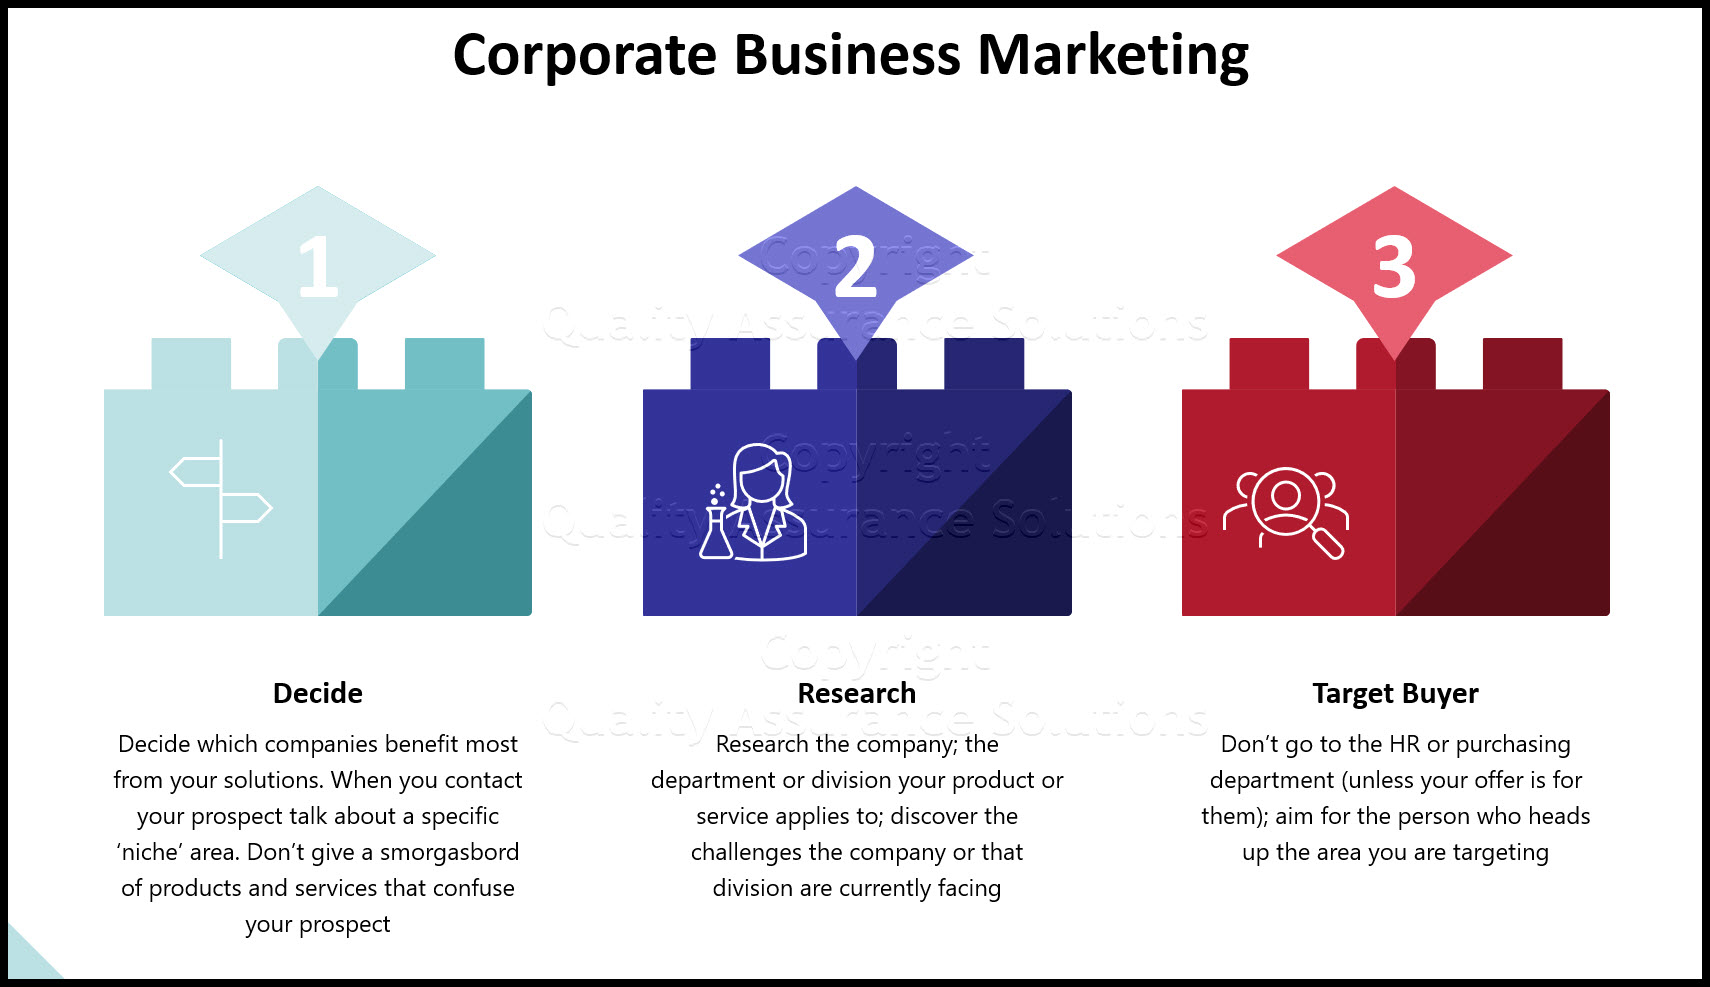 Corporate business marketing involves understanding the business needs, conducting research and finding the right person, and having realistic expectations.